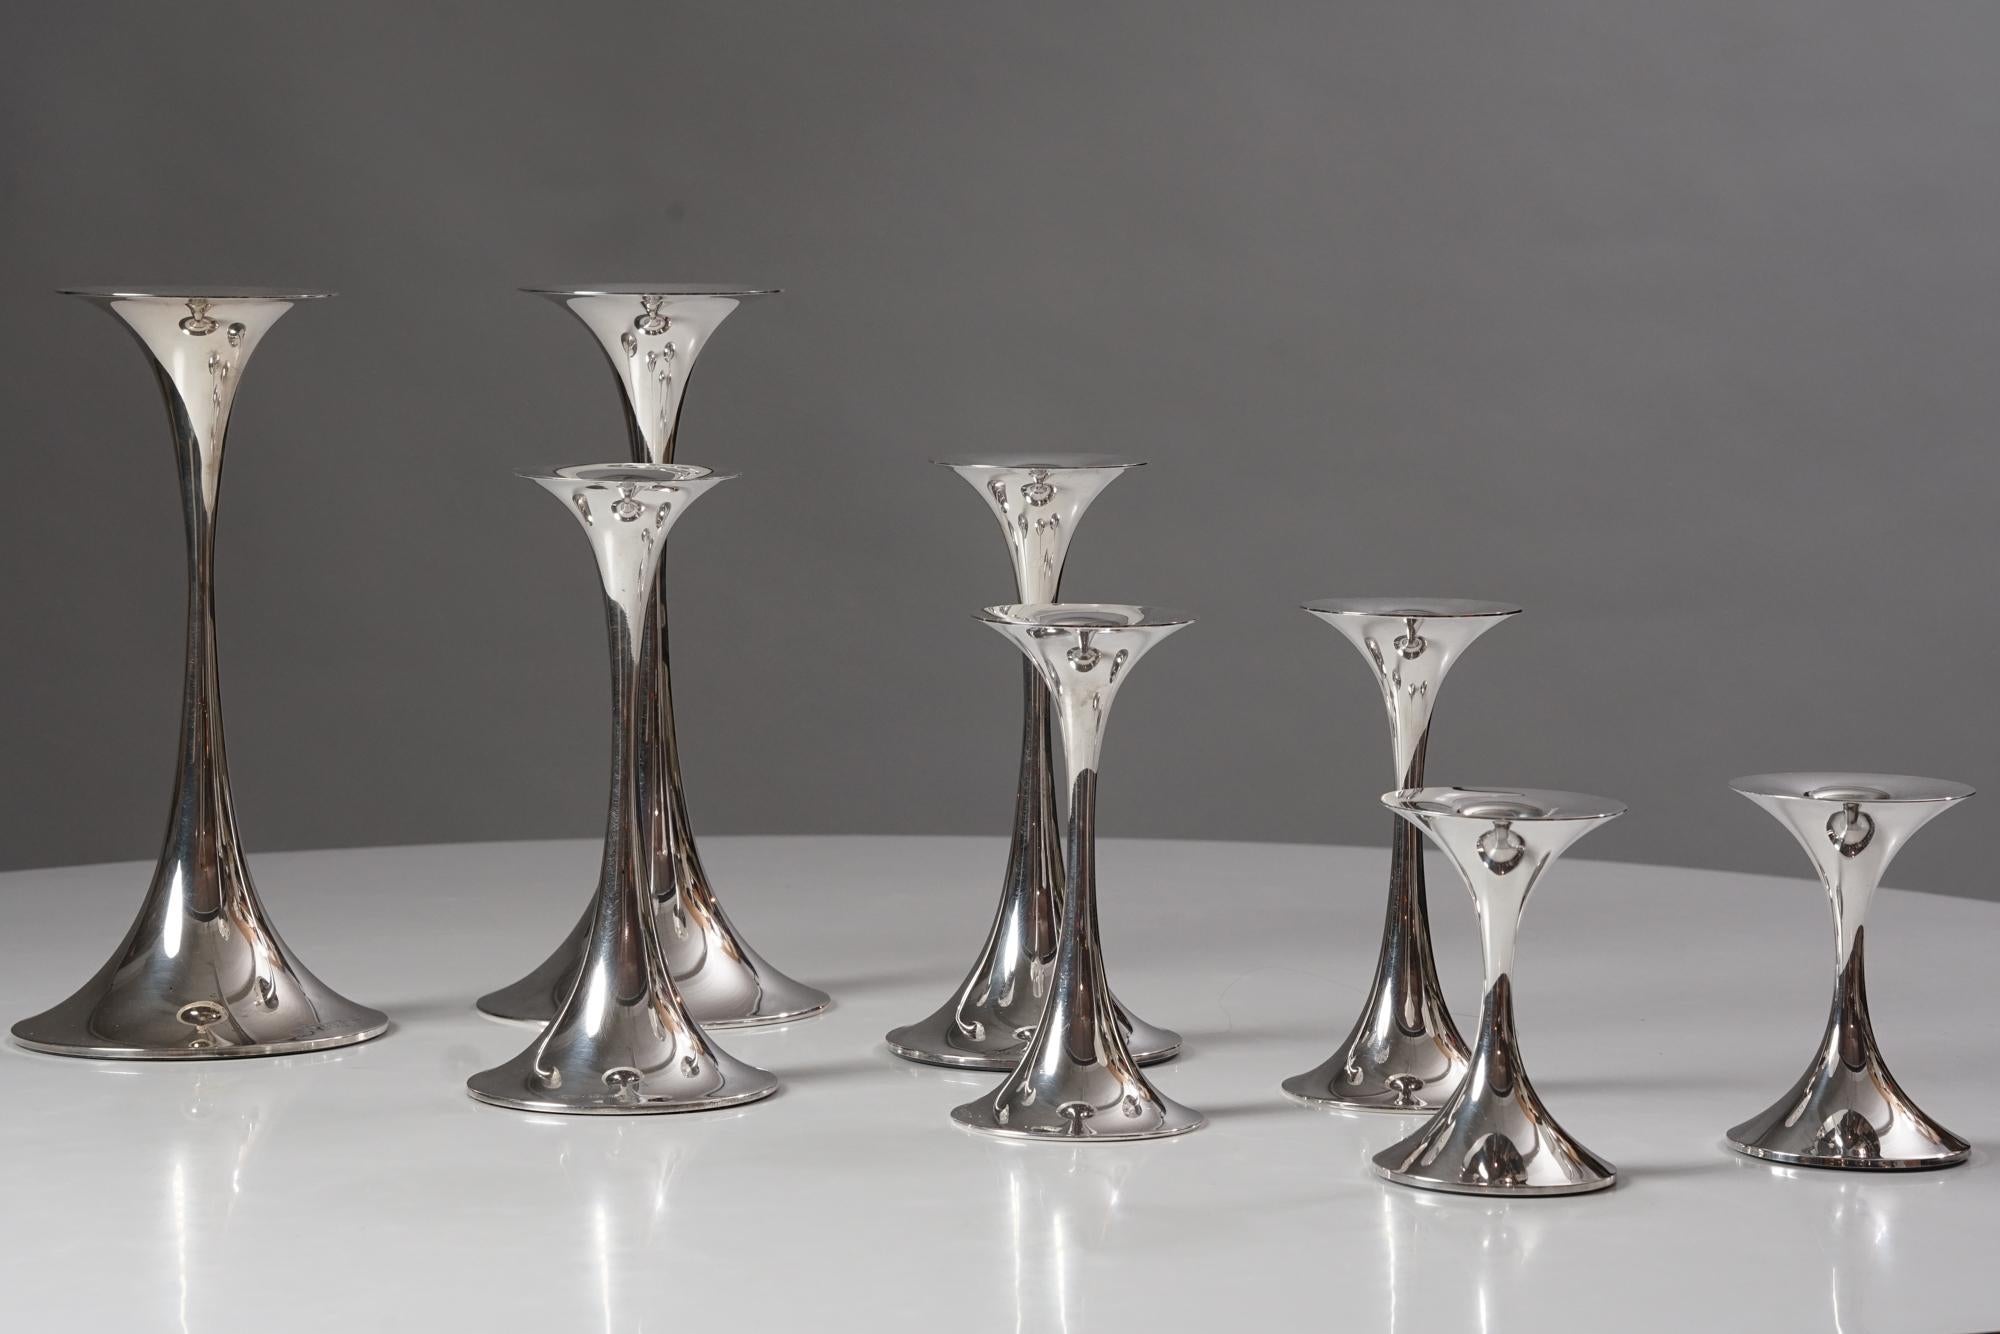  Set of trumpet candle holders, designed by Tapio Wirkkala, manufactured by Kultakeskus Oy, Mid-20th Century. Silver. Marked and signed. The set includes eight candle holders. Good vintage condition, minor patina and wear consistent with age and